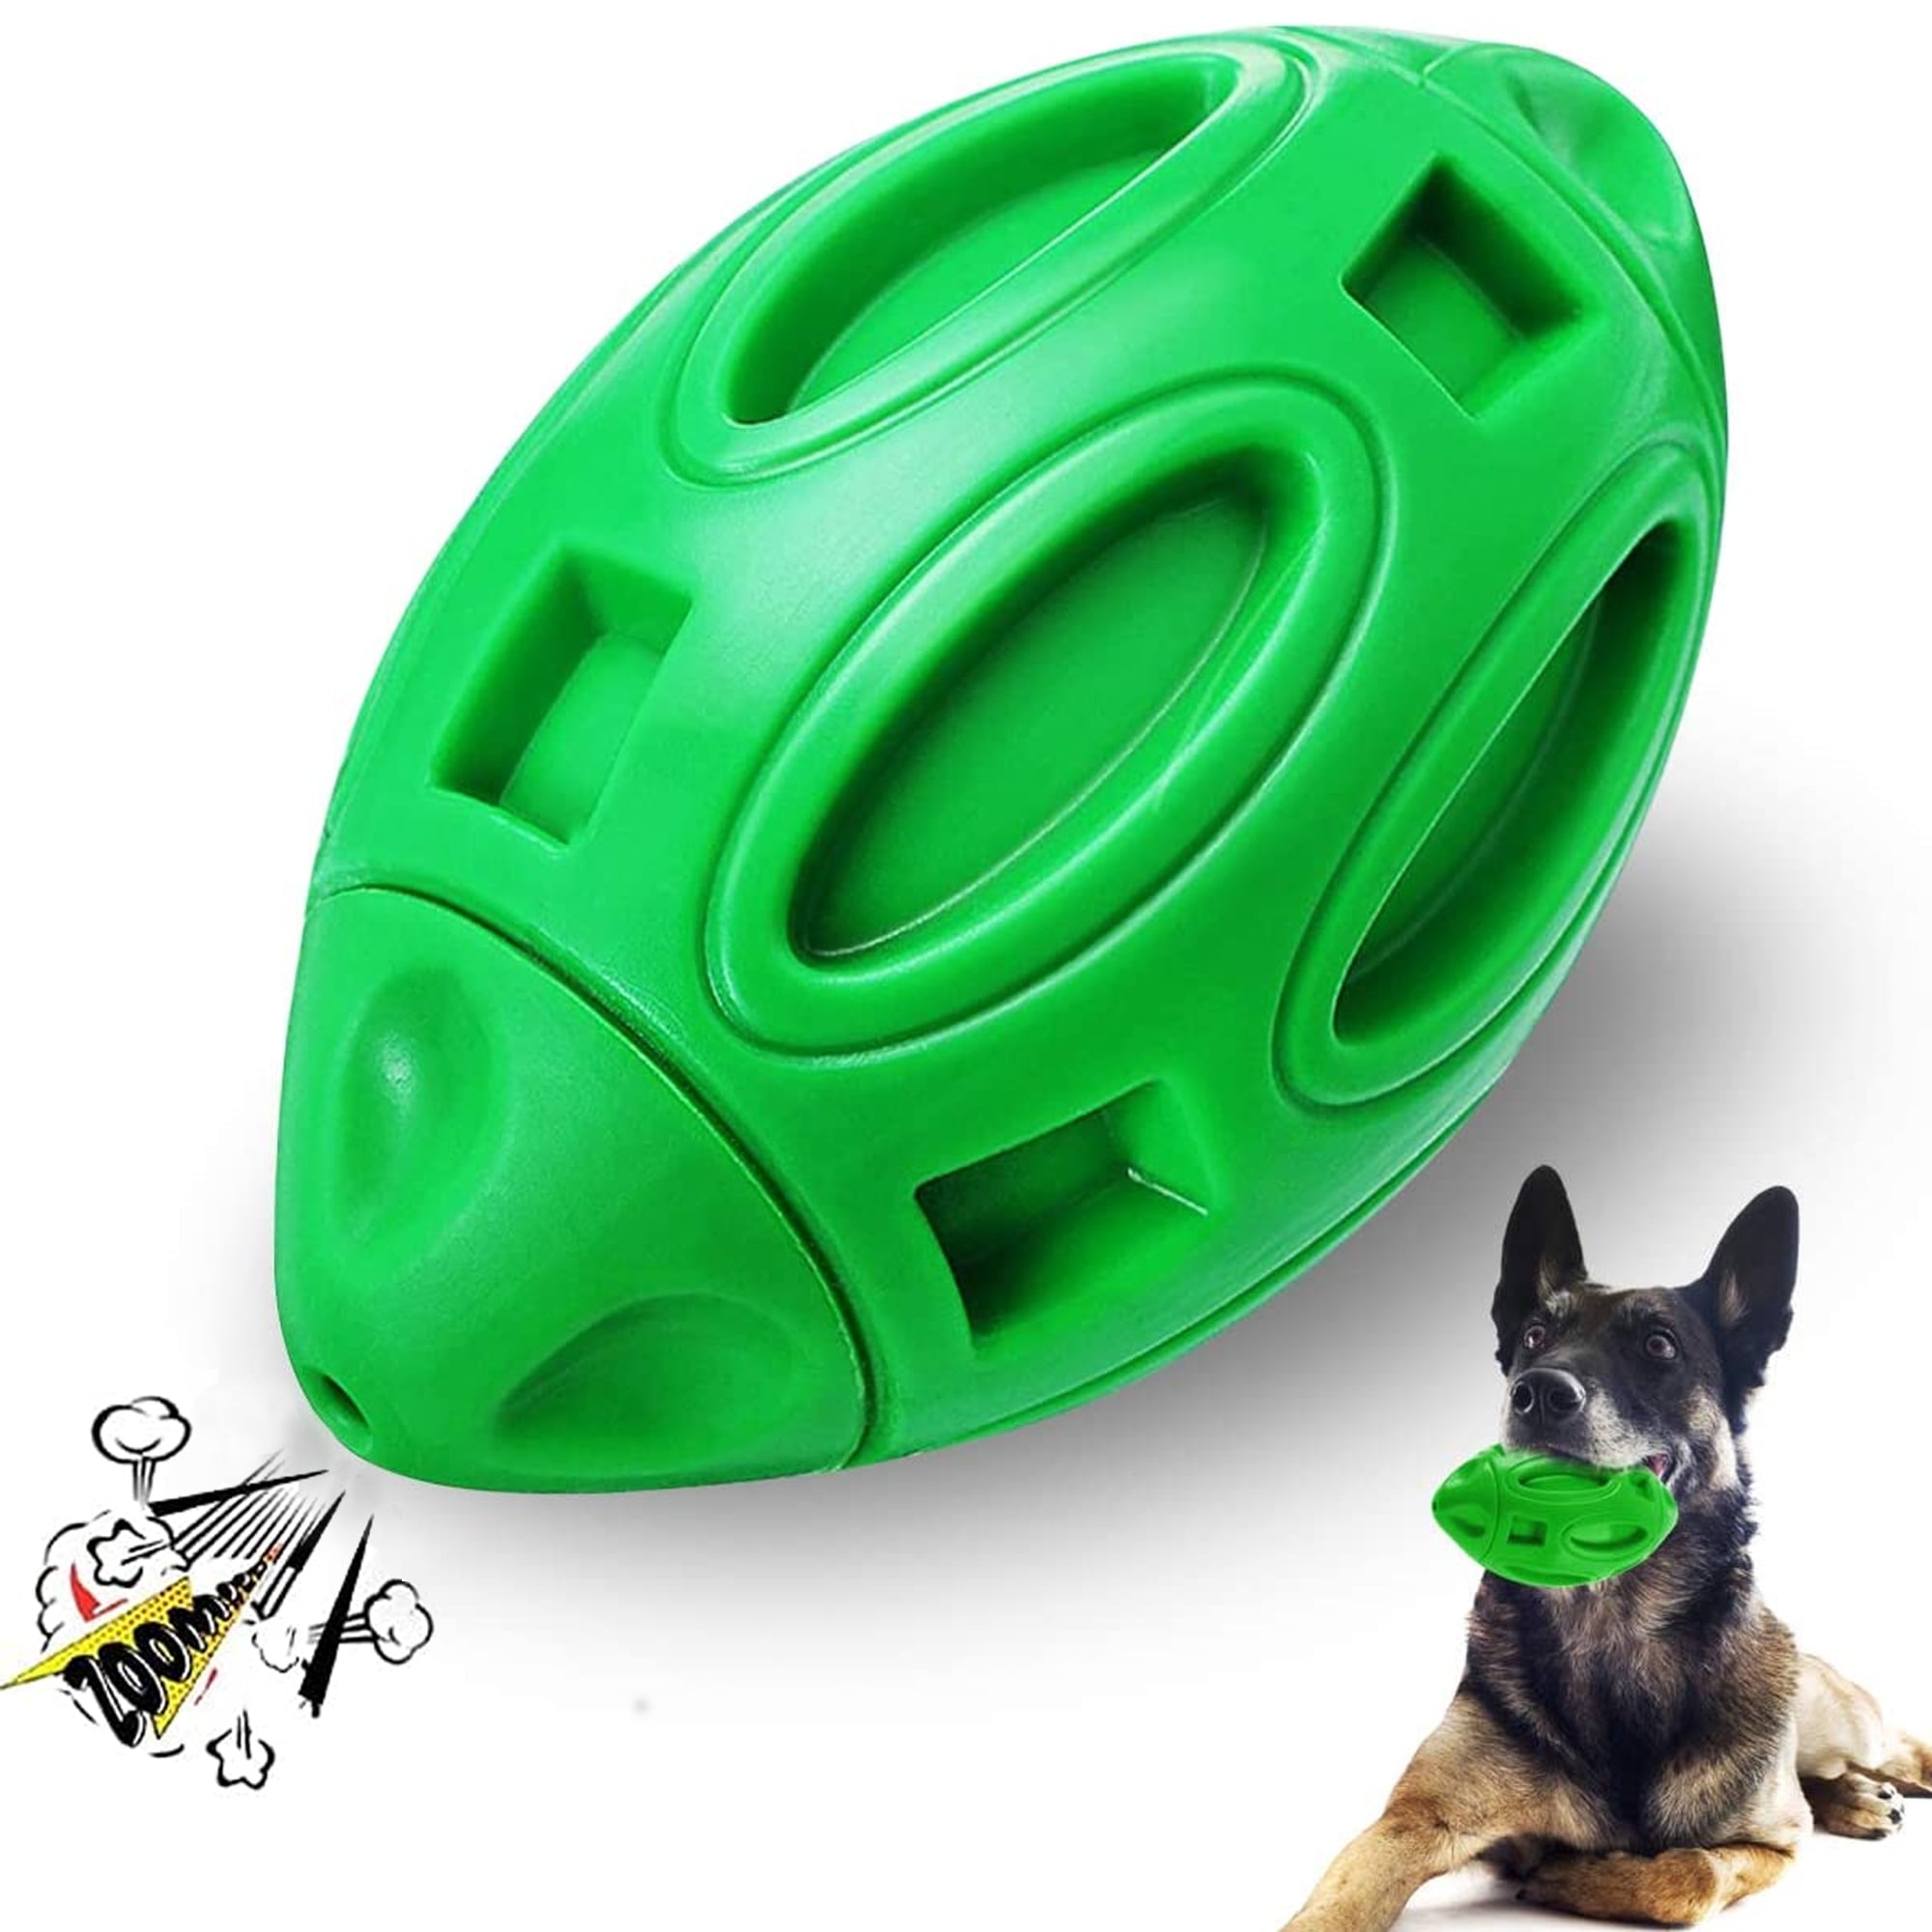 15 Best Interactive Dog Toys 2022 - Fun Interactive Dog Feeder and